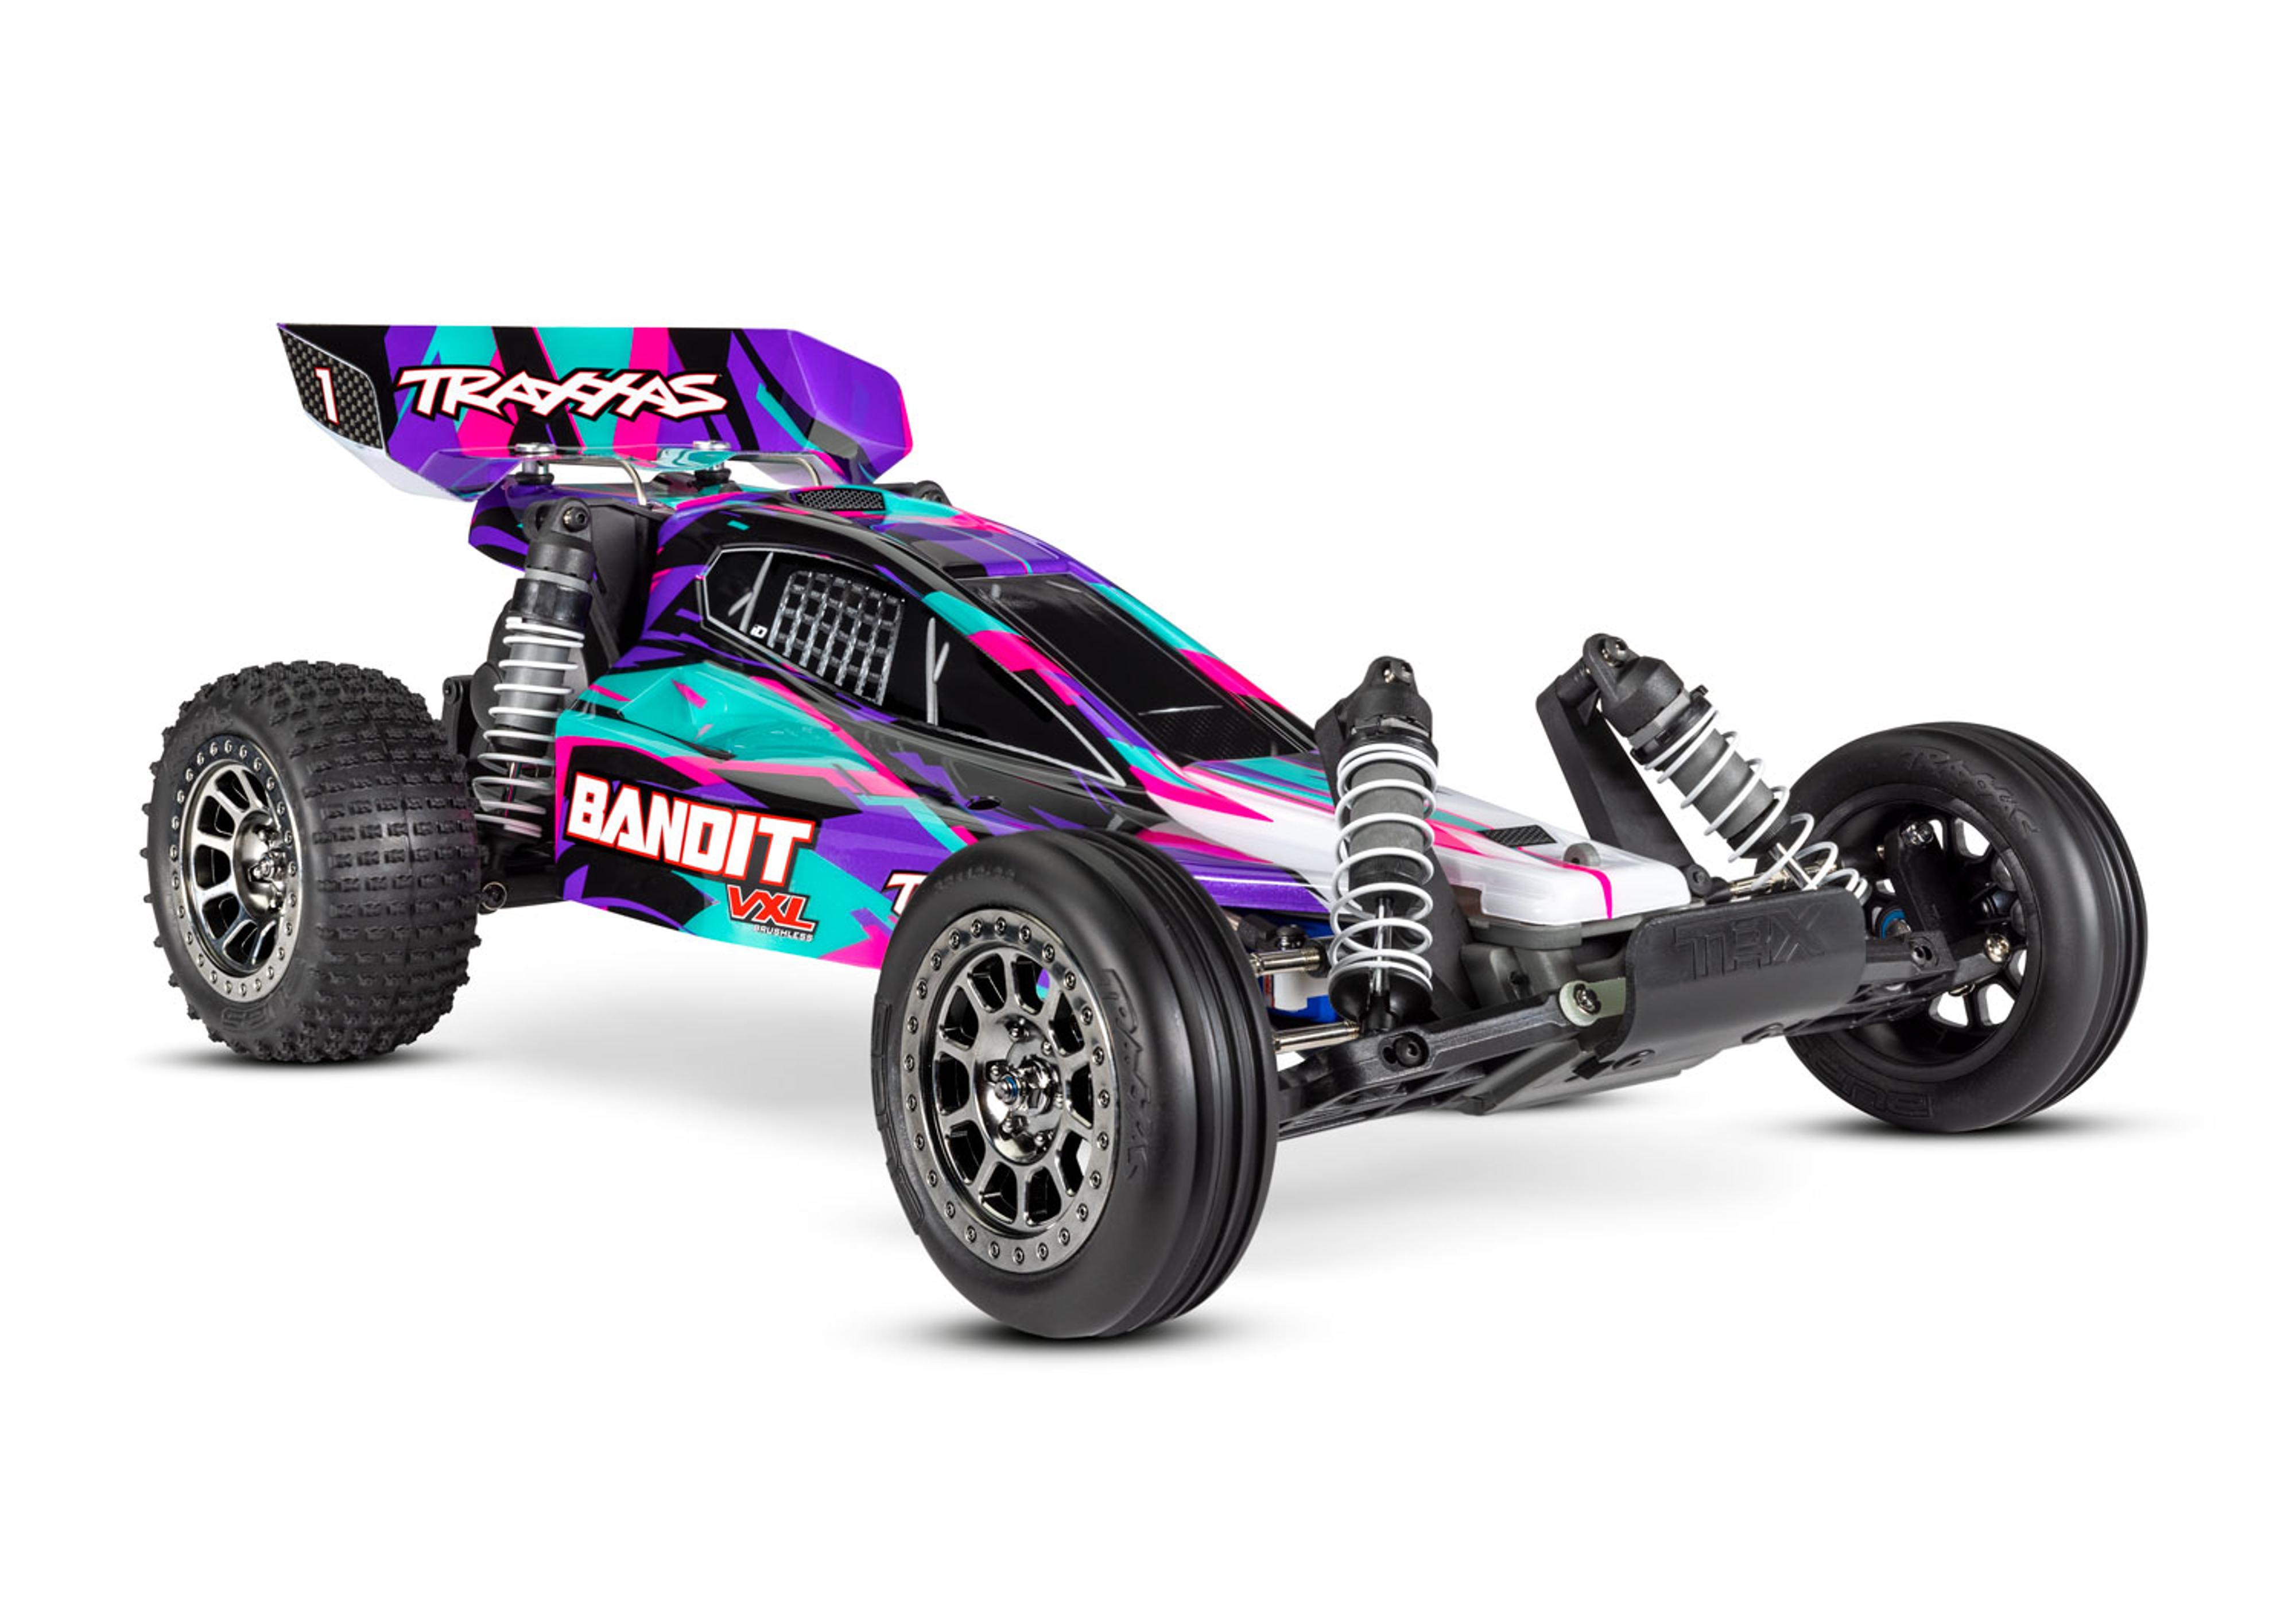 Traxxas Bandit VXL Off-Road Buggy